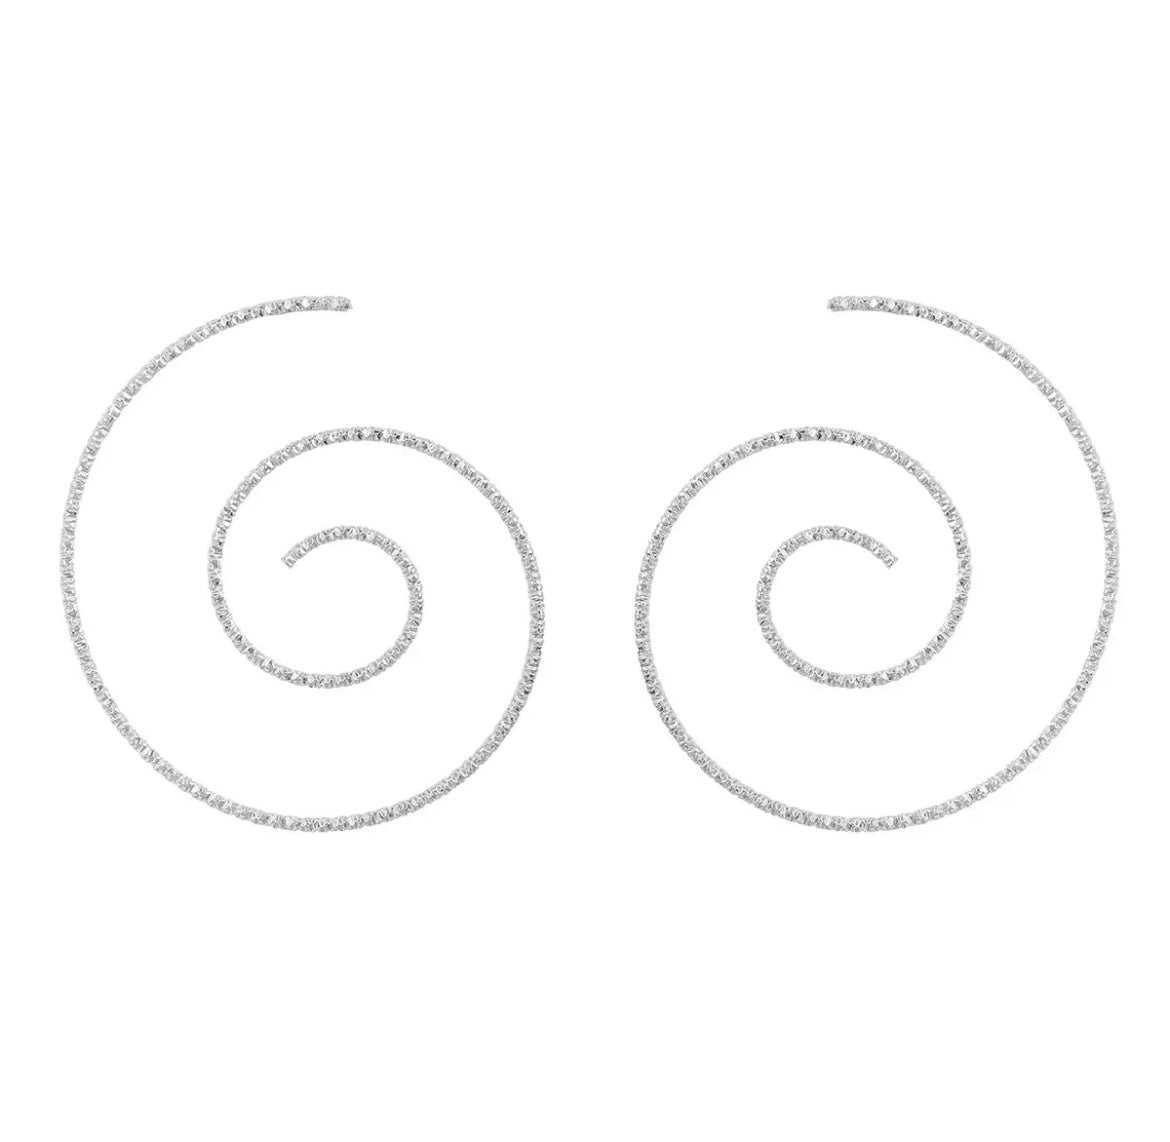 Whimsical Lineage Spiral Earrings